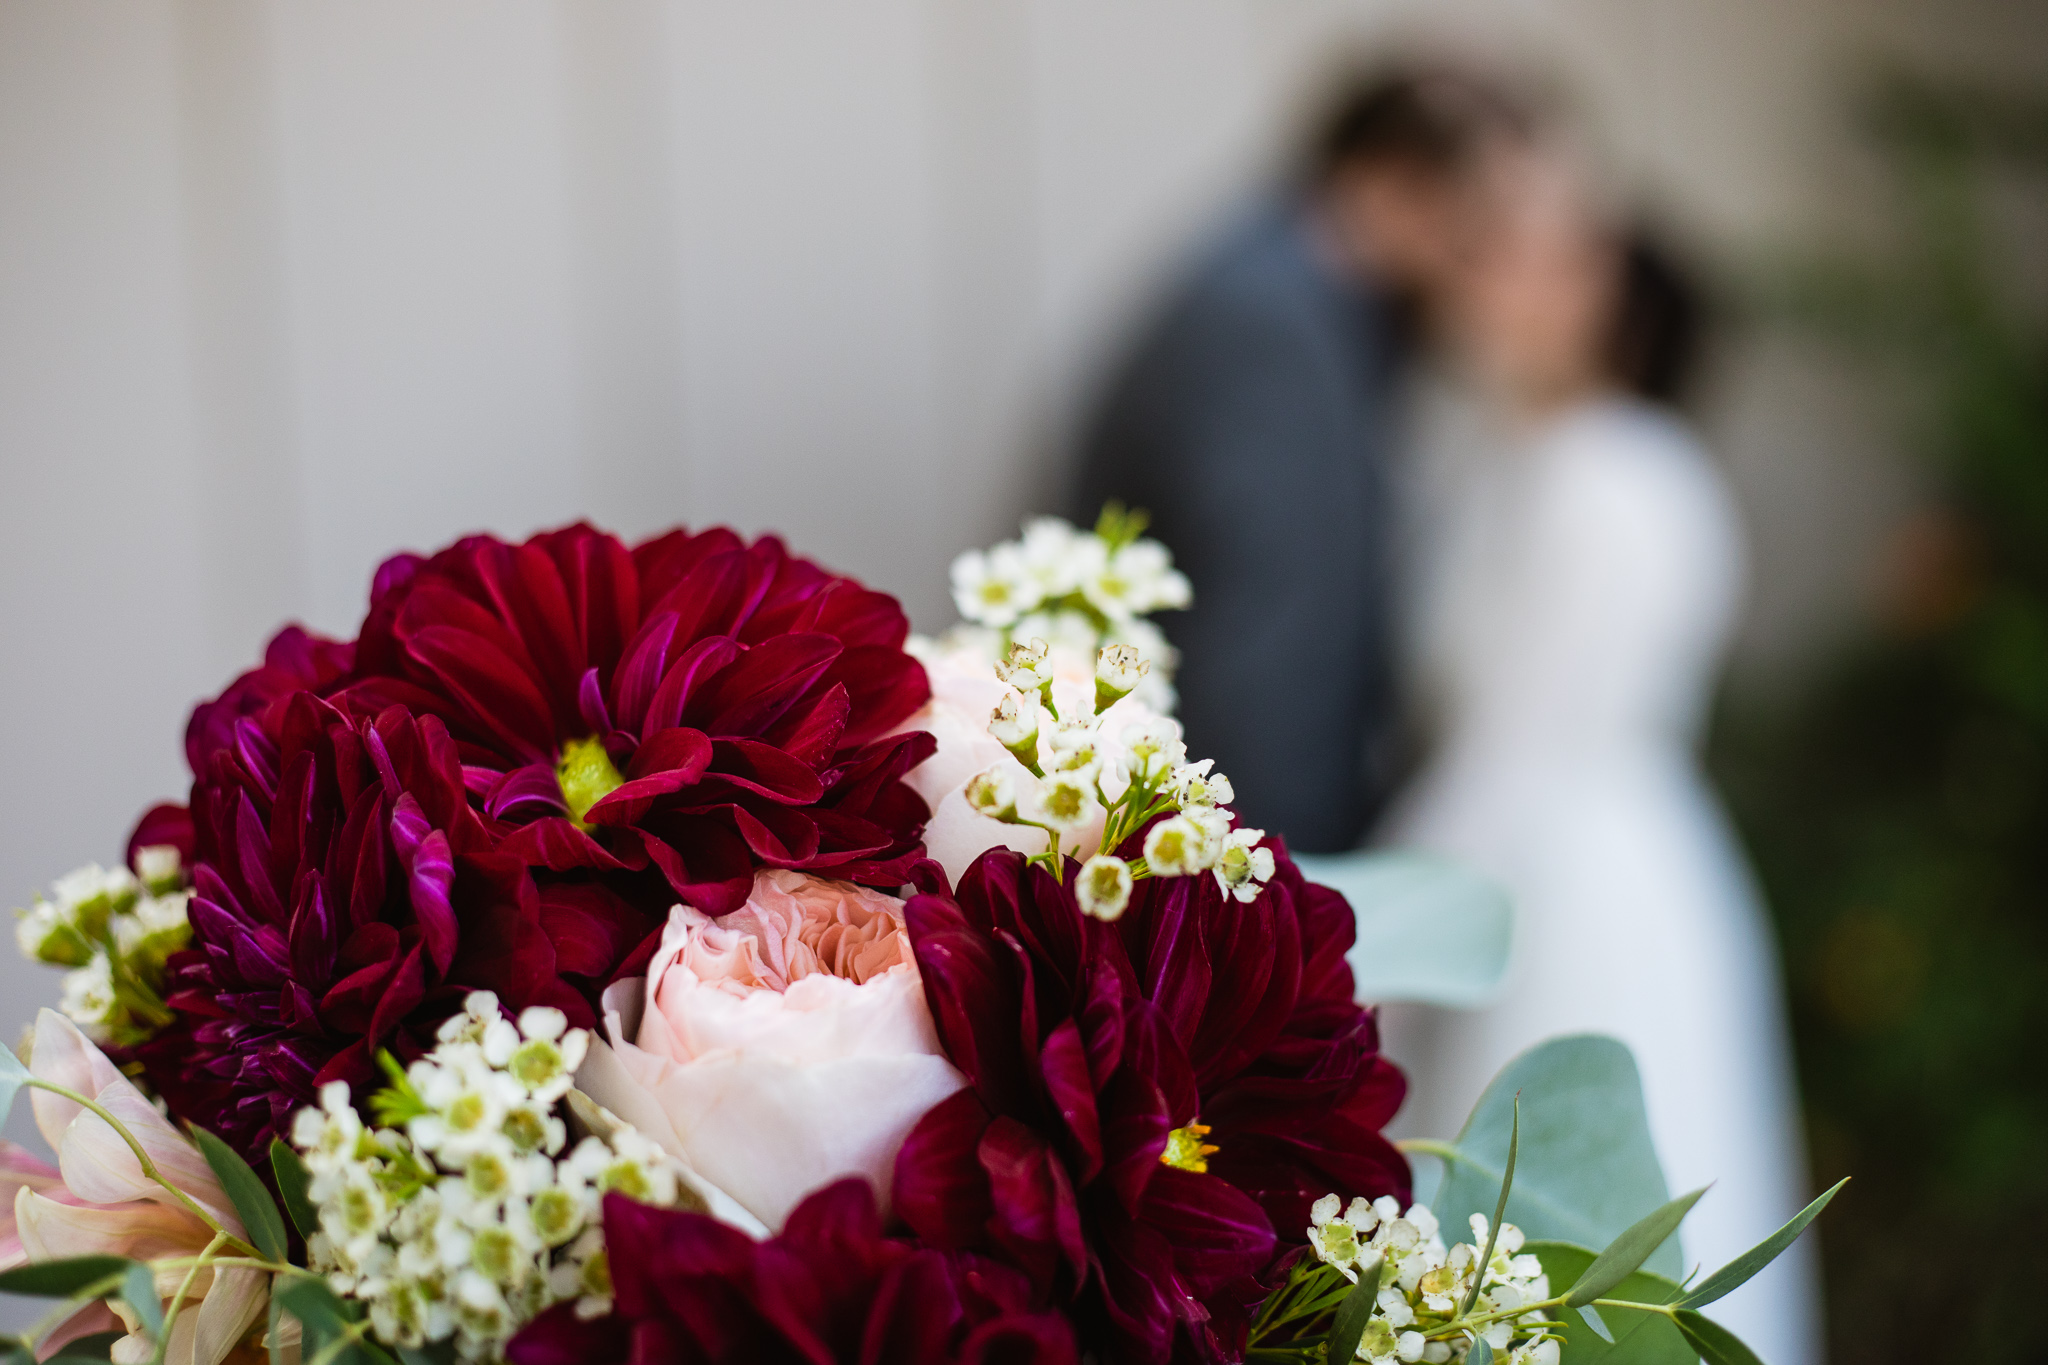 Burgundy pink and cream wedding bouquet with bride and groom kissing in the background.